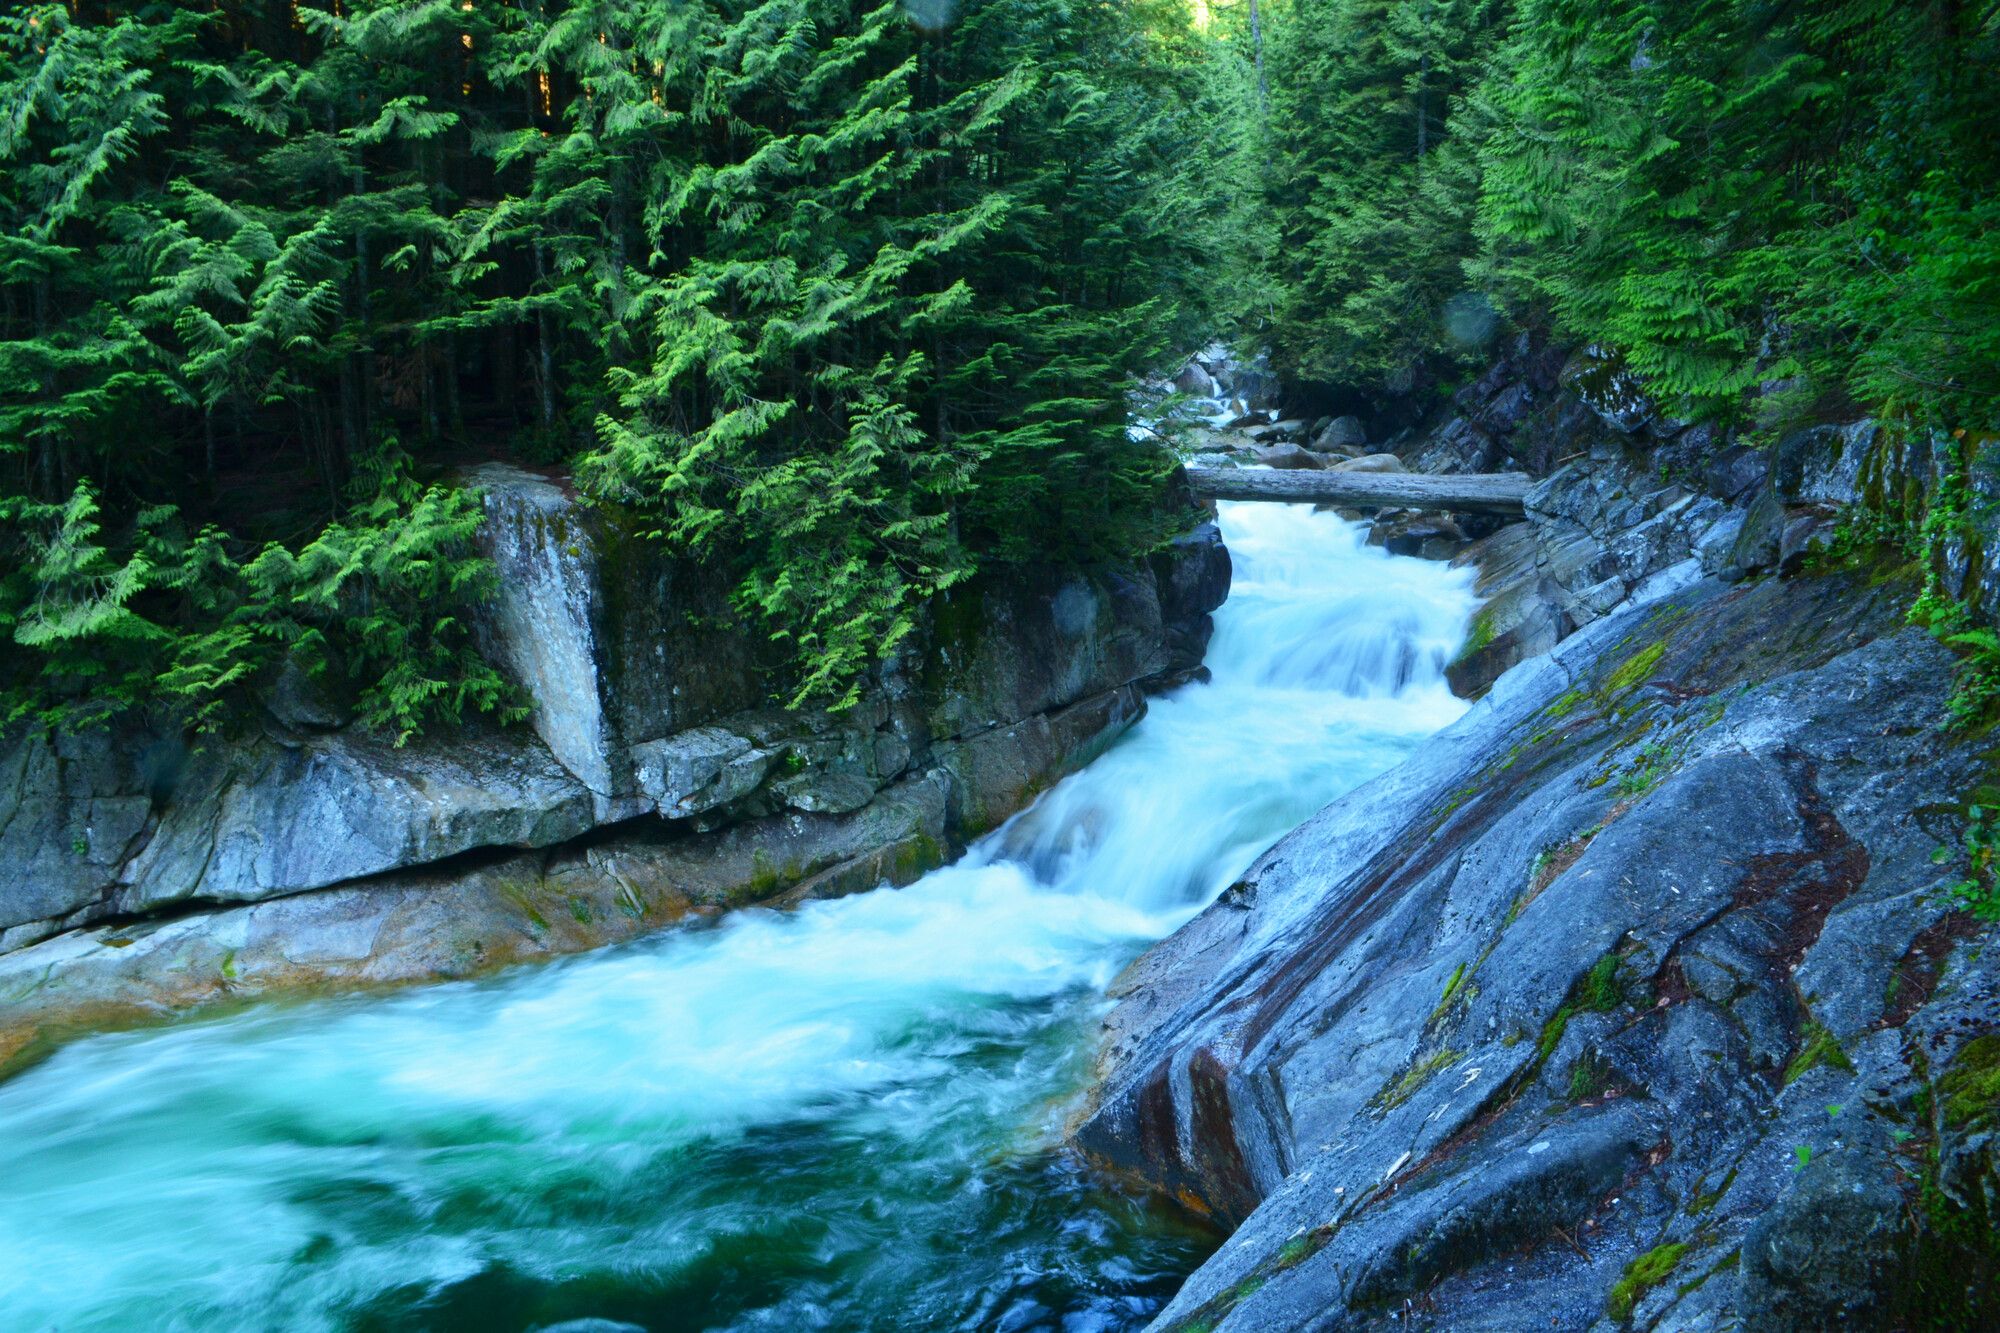 Gold Creek flowing down the canyon through the forest in Golden Ears Park.